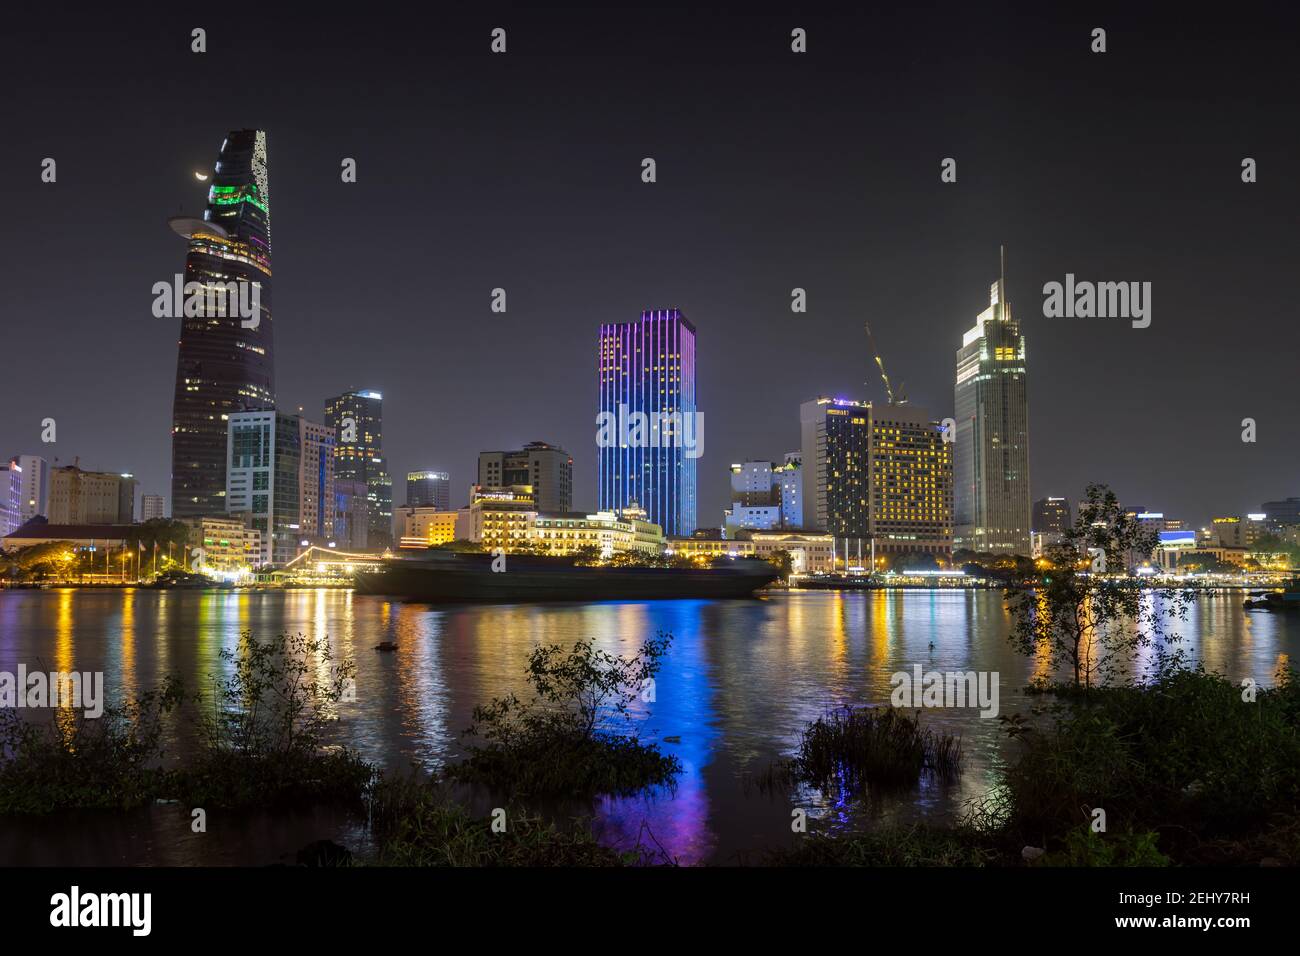 Modern architecture in downtown of Ho Chi Minh City, with river Saigon at night Stock Photo